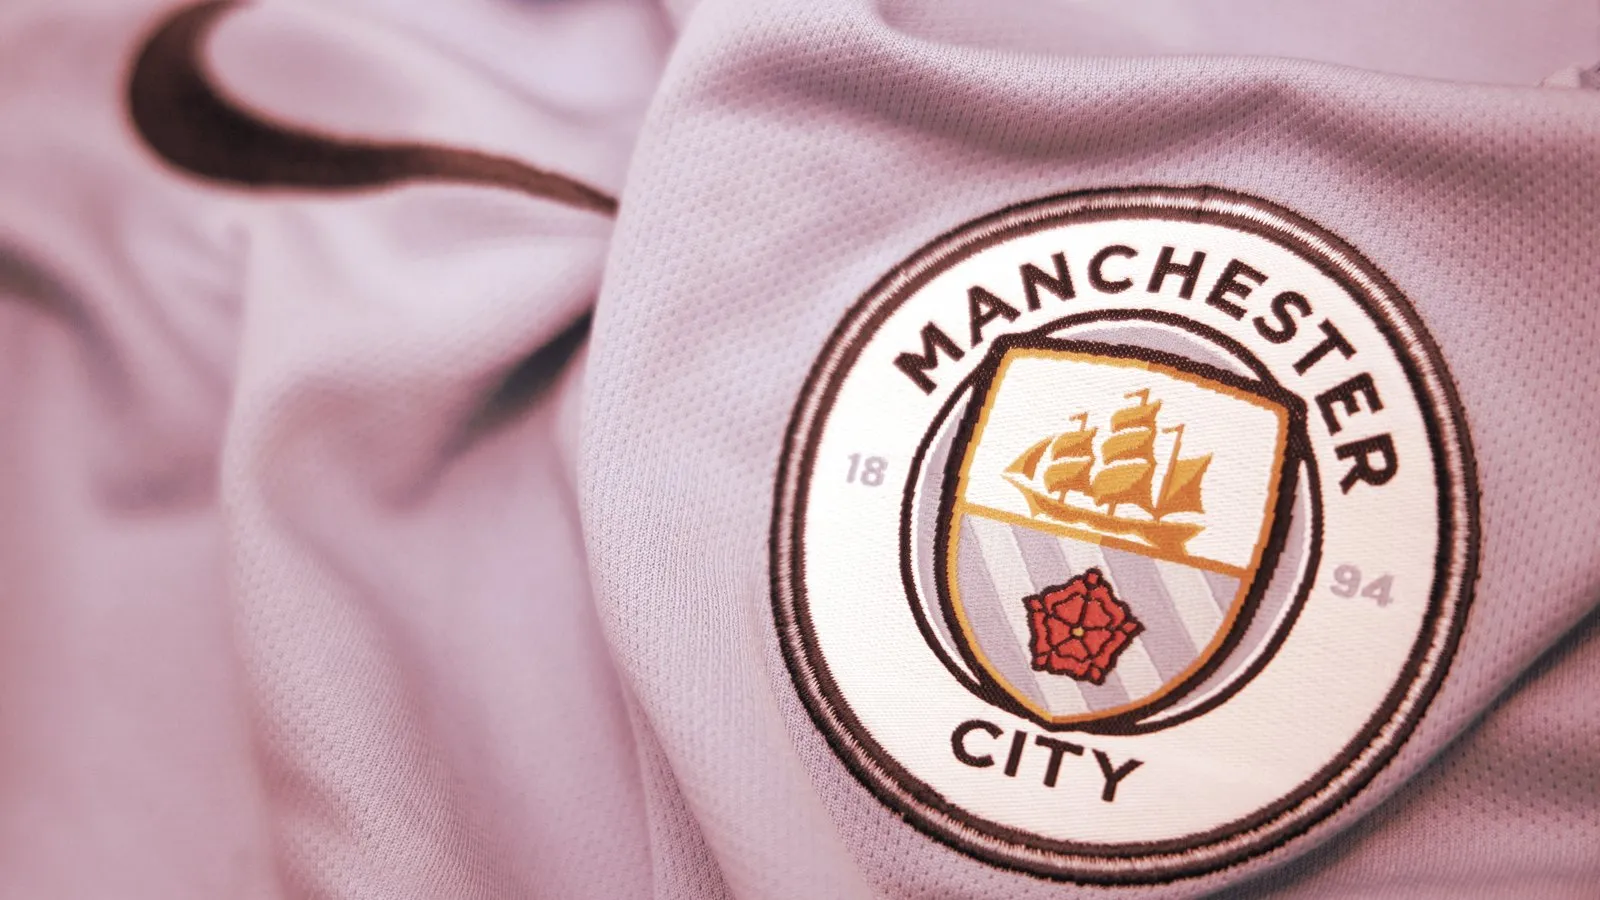 The Logo of Manchester City Football Club. Image: Shutterstock